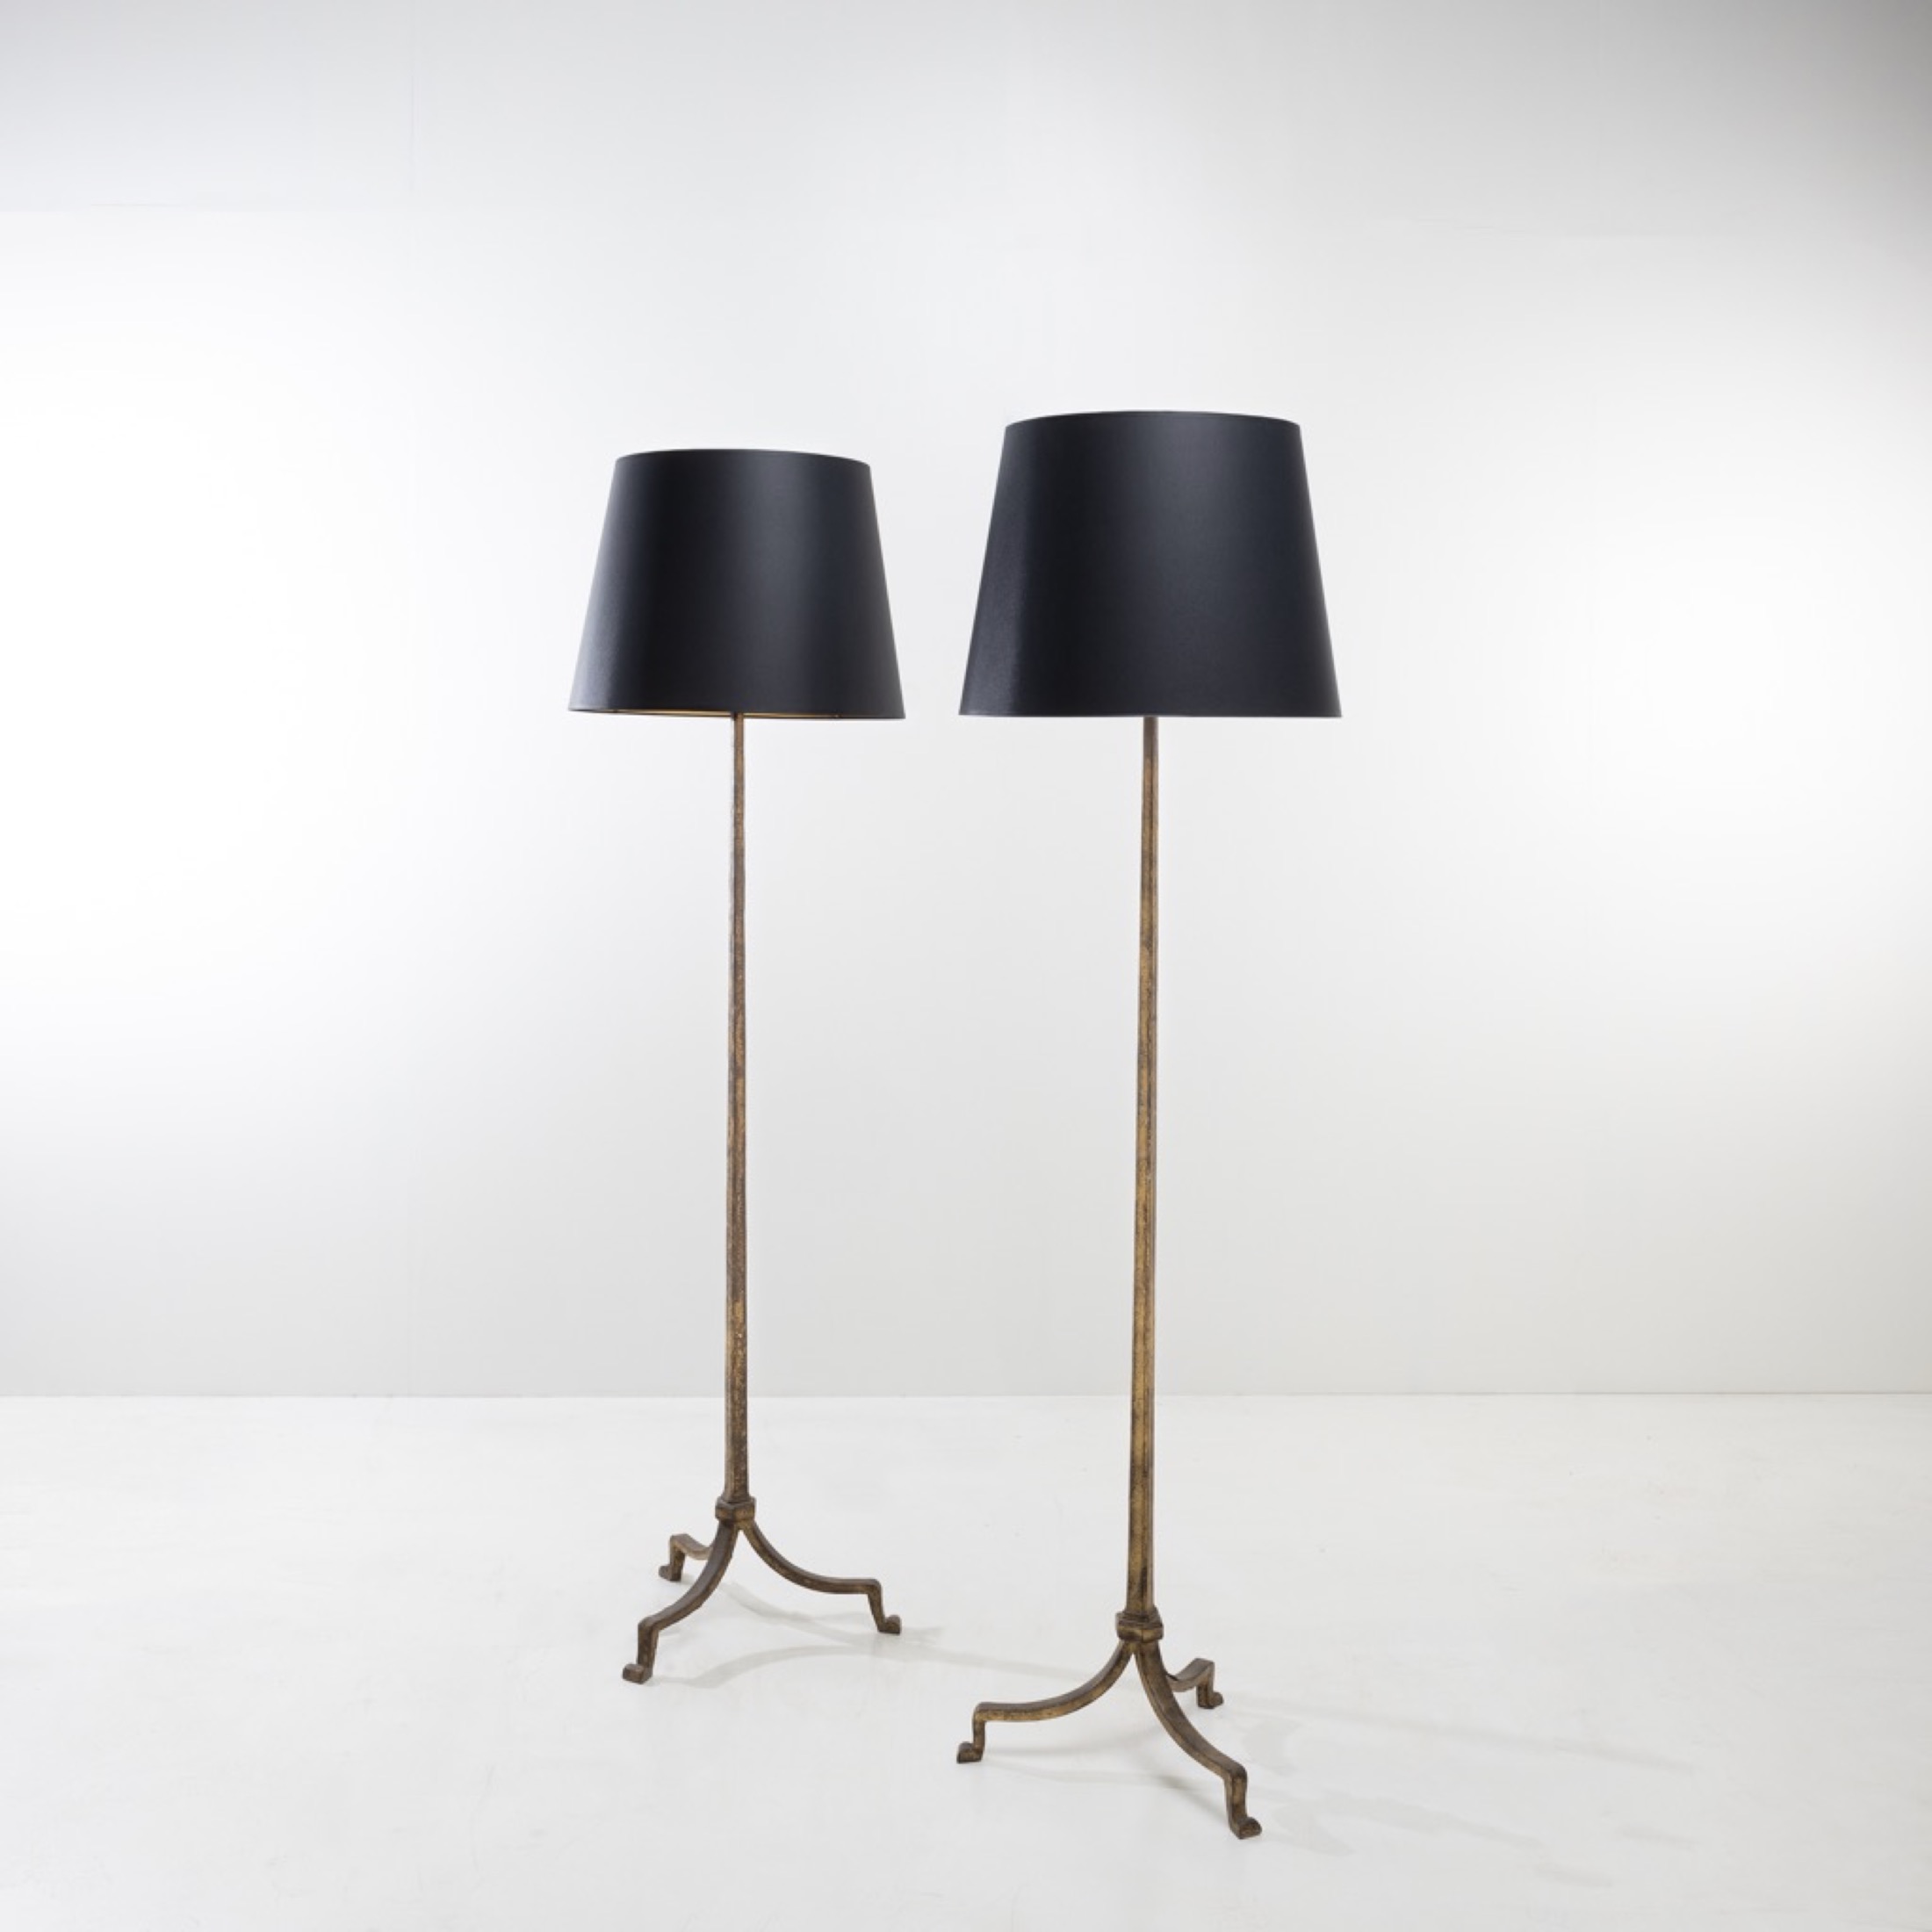 Pair of floor Lamps by Maison Ramsay